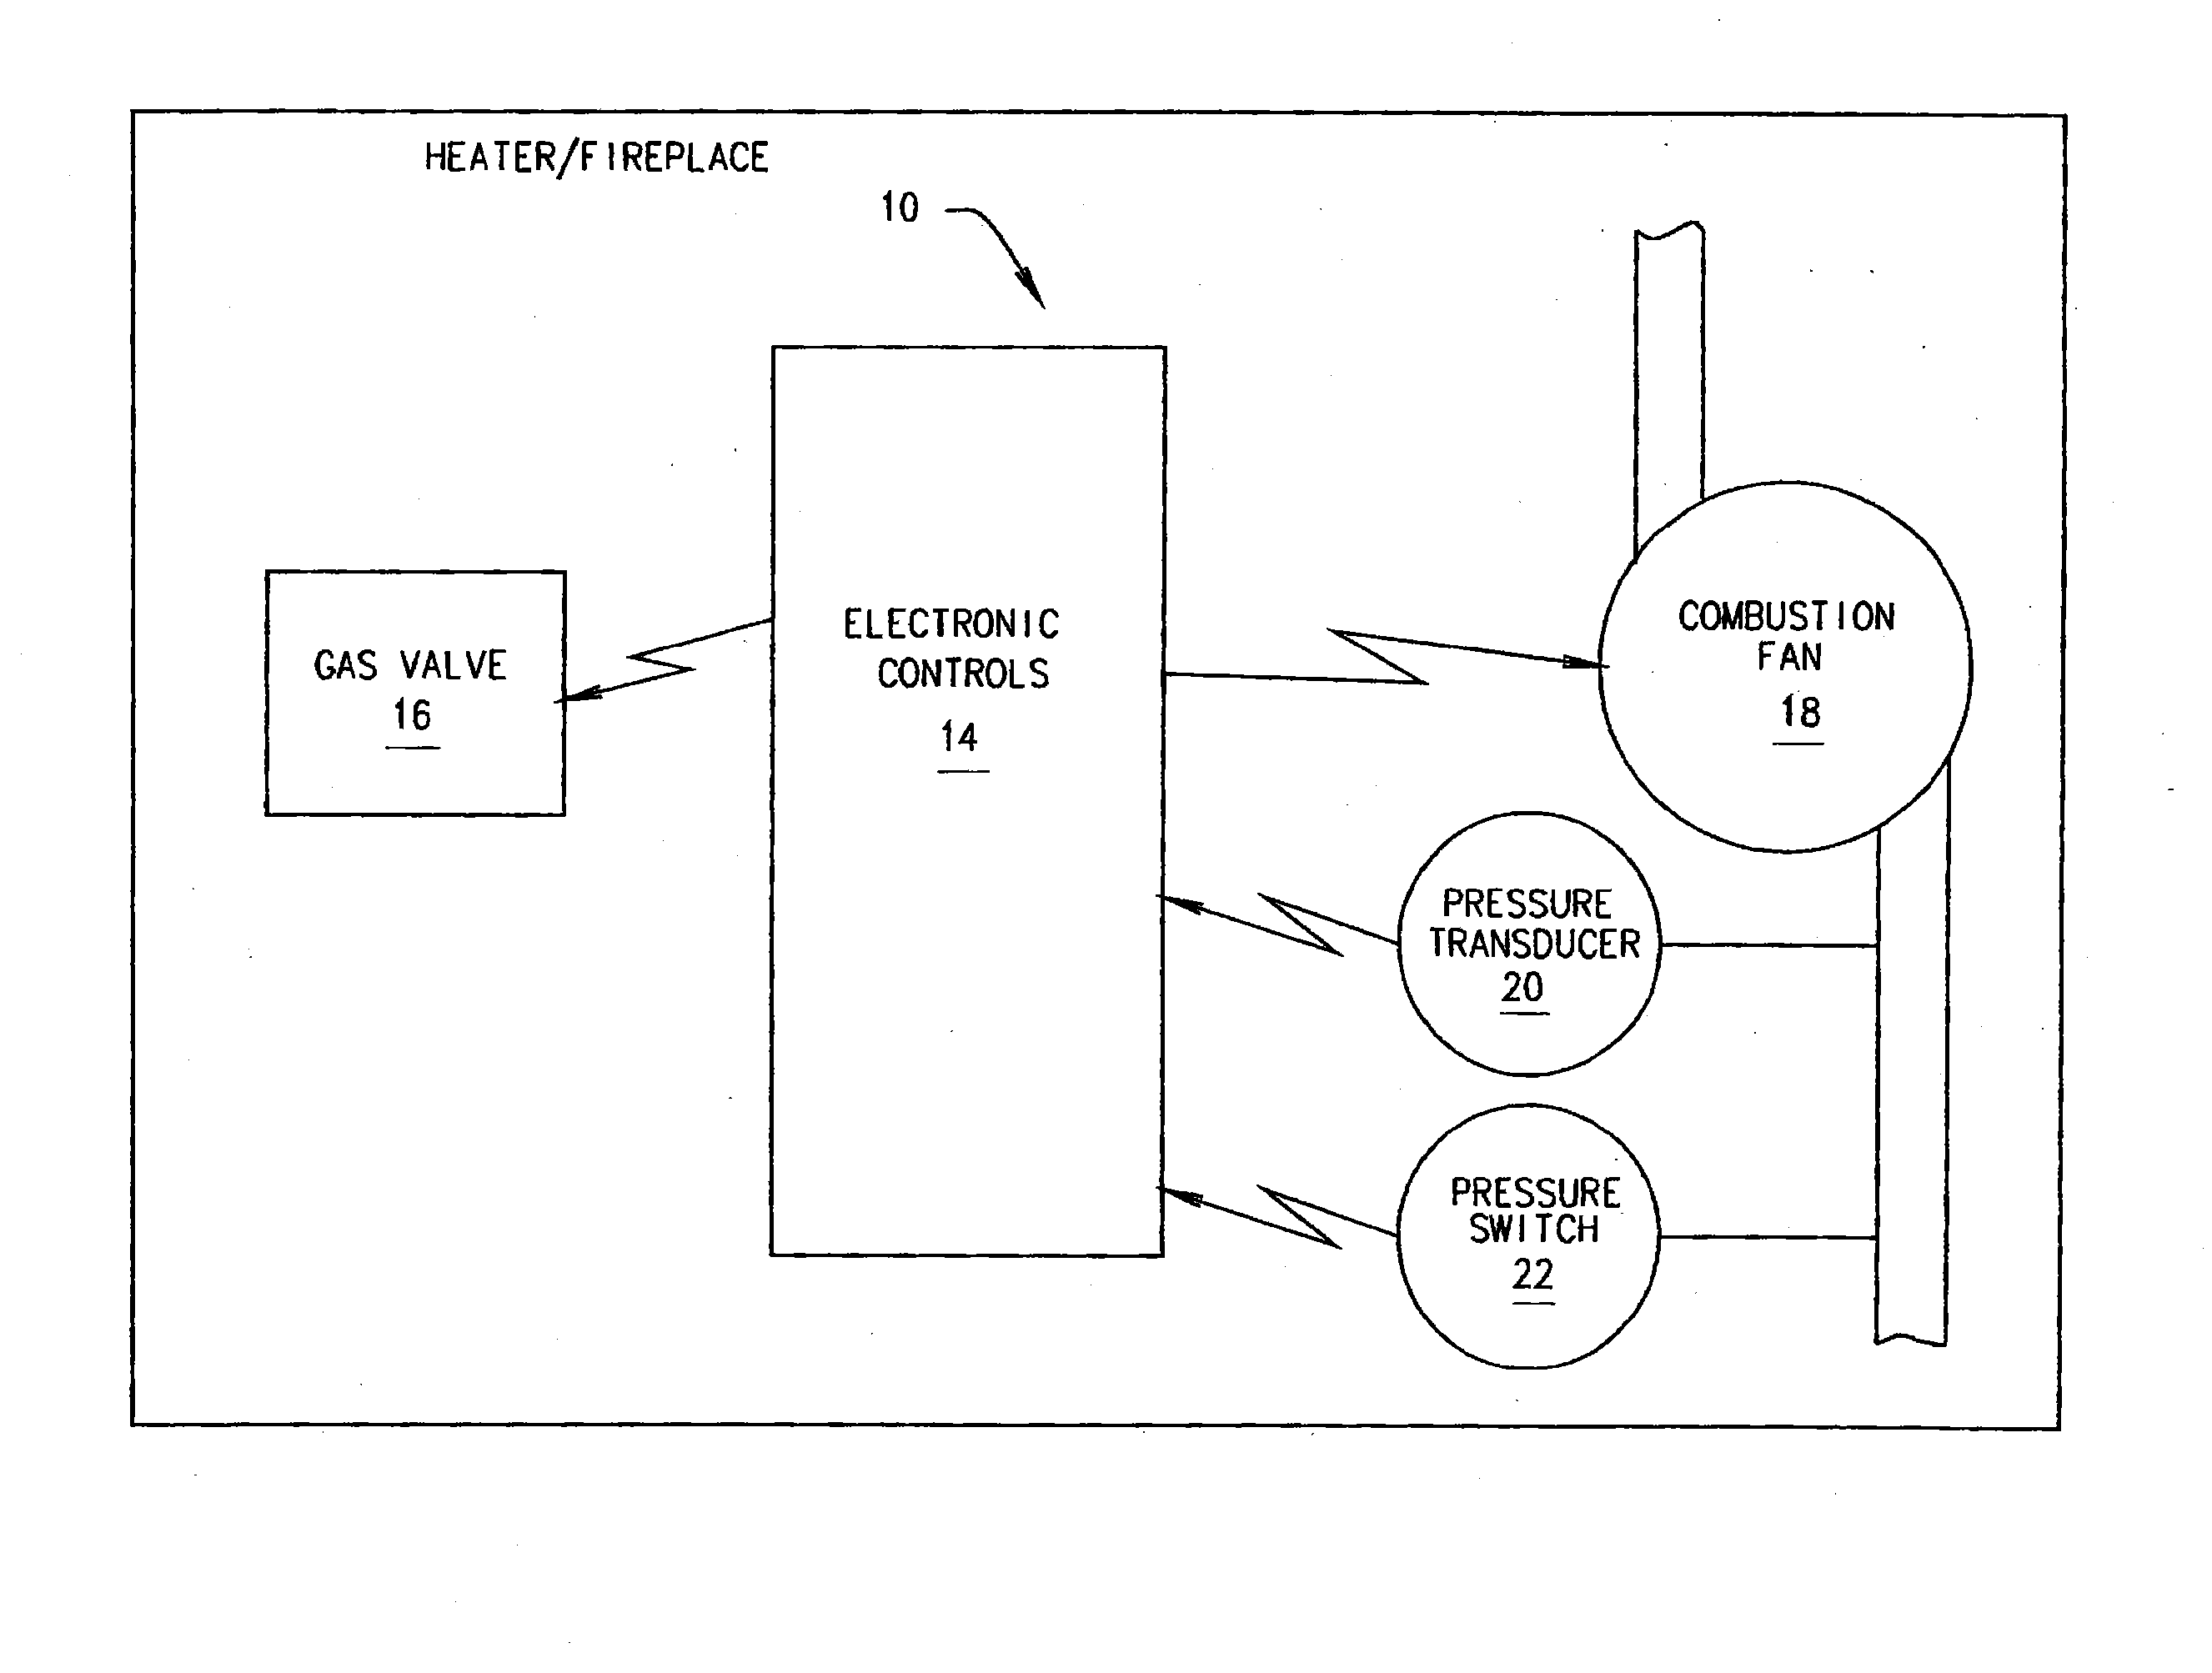 Control system for space heater/hearth